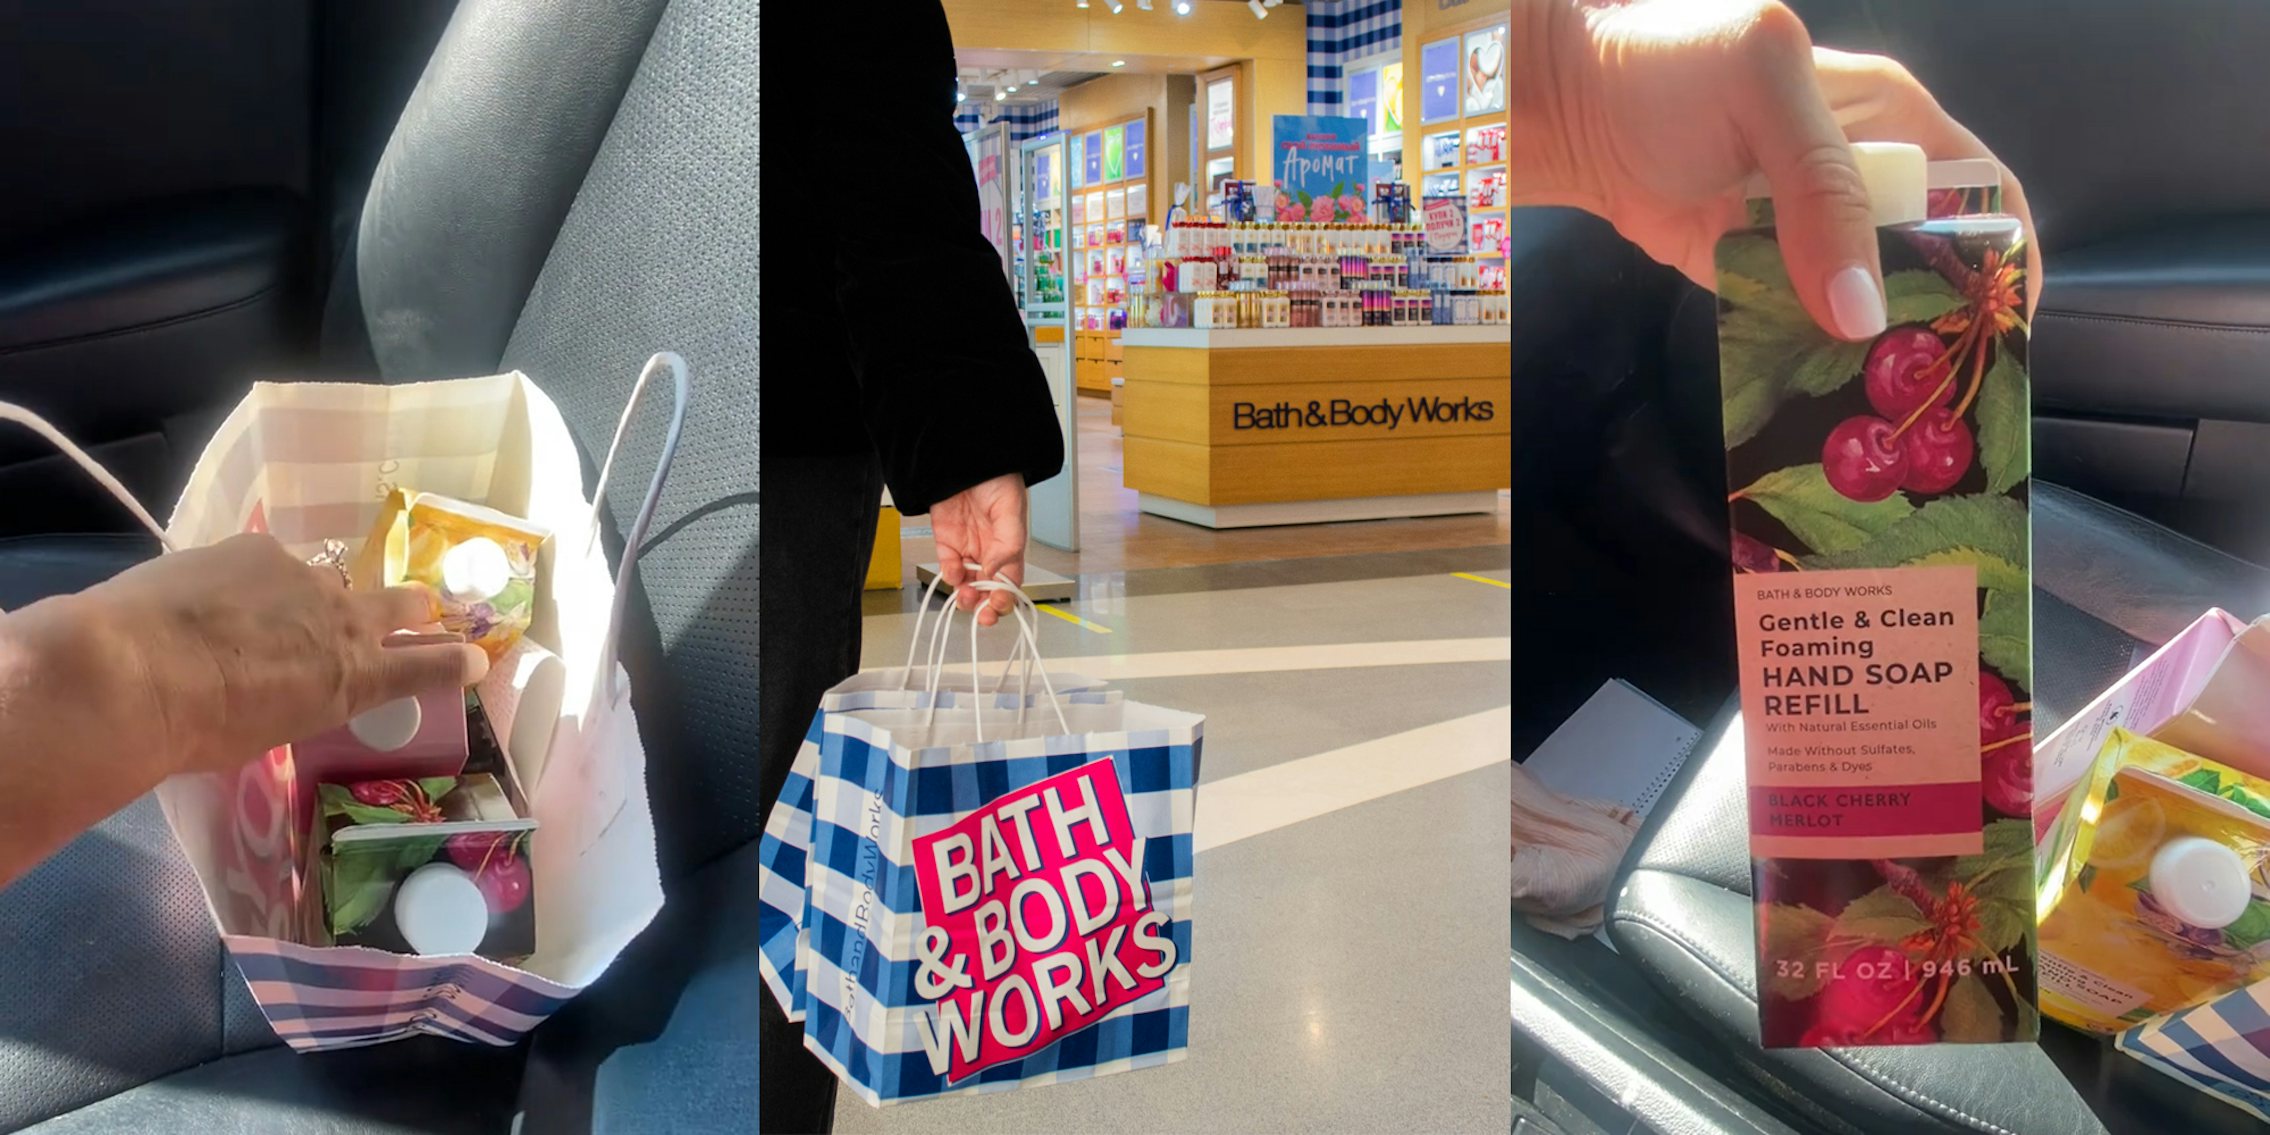 Bath & Body Works bag with hand soap refill containers inside on car seat (l) Bath & Body Works shopper exiting store with bag in hand (c) Bath & Body Works bag hand soap refill container in hand with more on car seat (r)